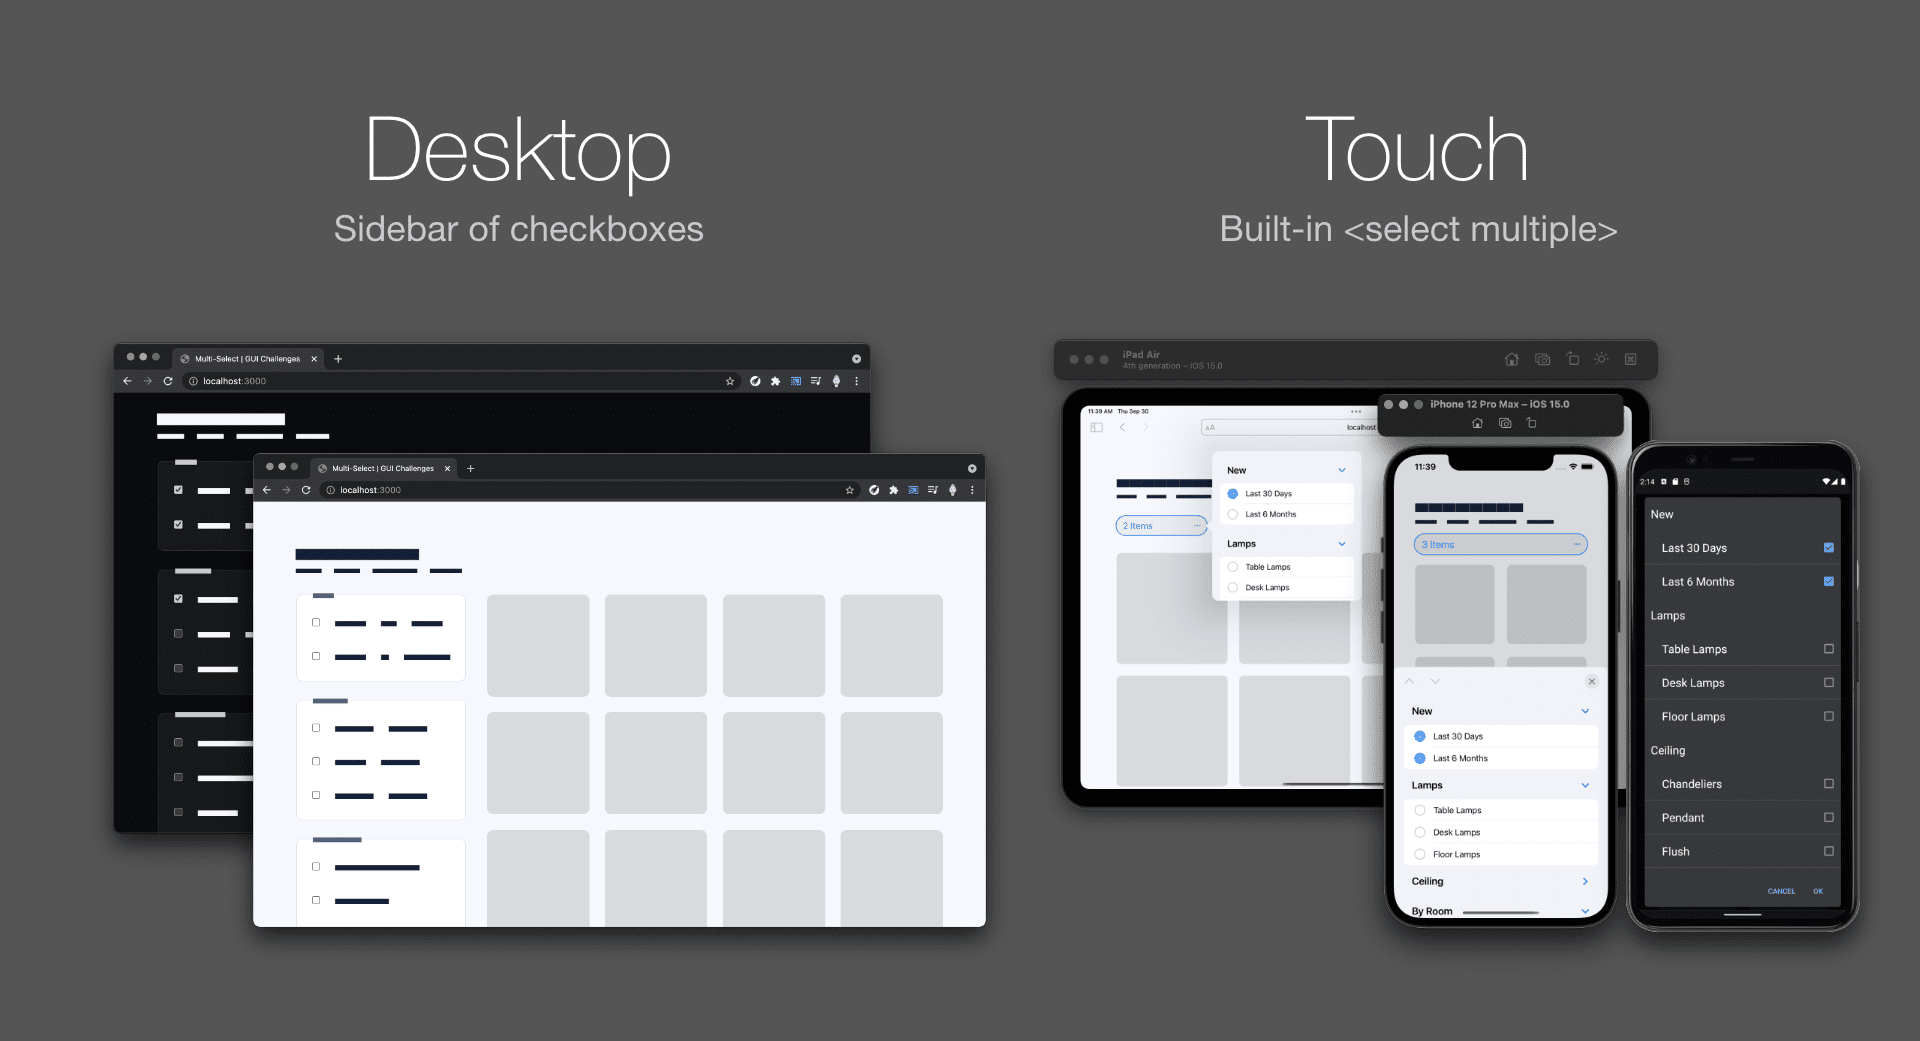 Comparison screenshot showing desktop light and dark with a sidebar of
checkboxes vs mobile iOS and Android with a multi-select element.